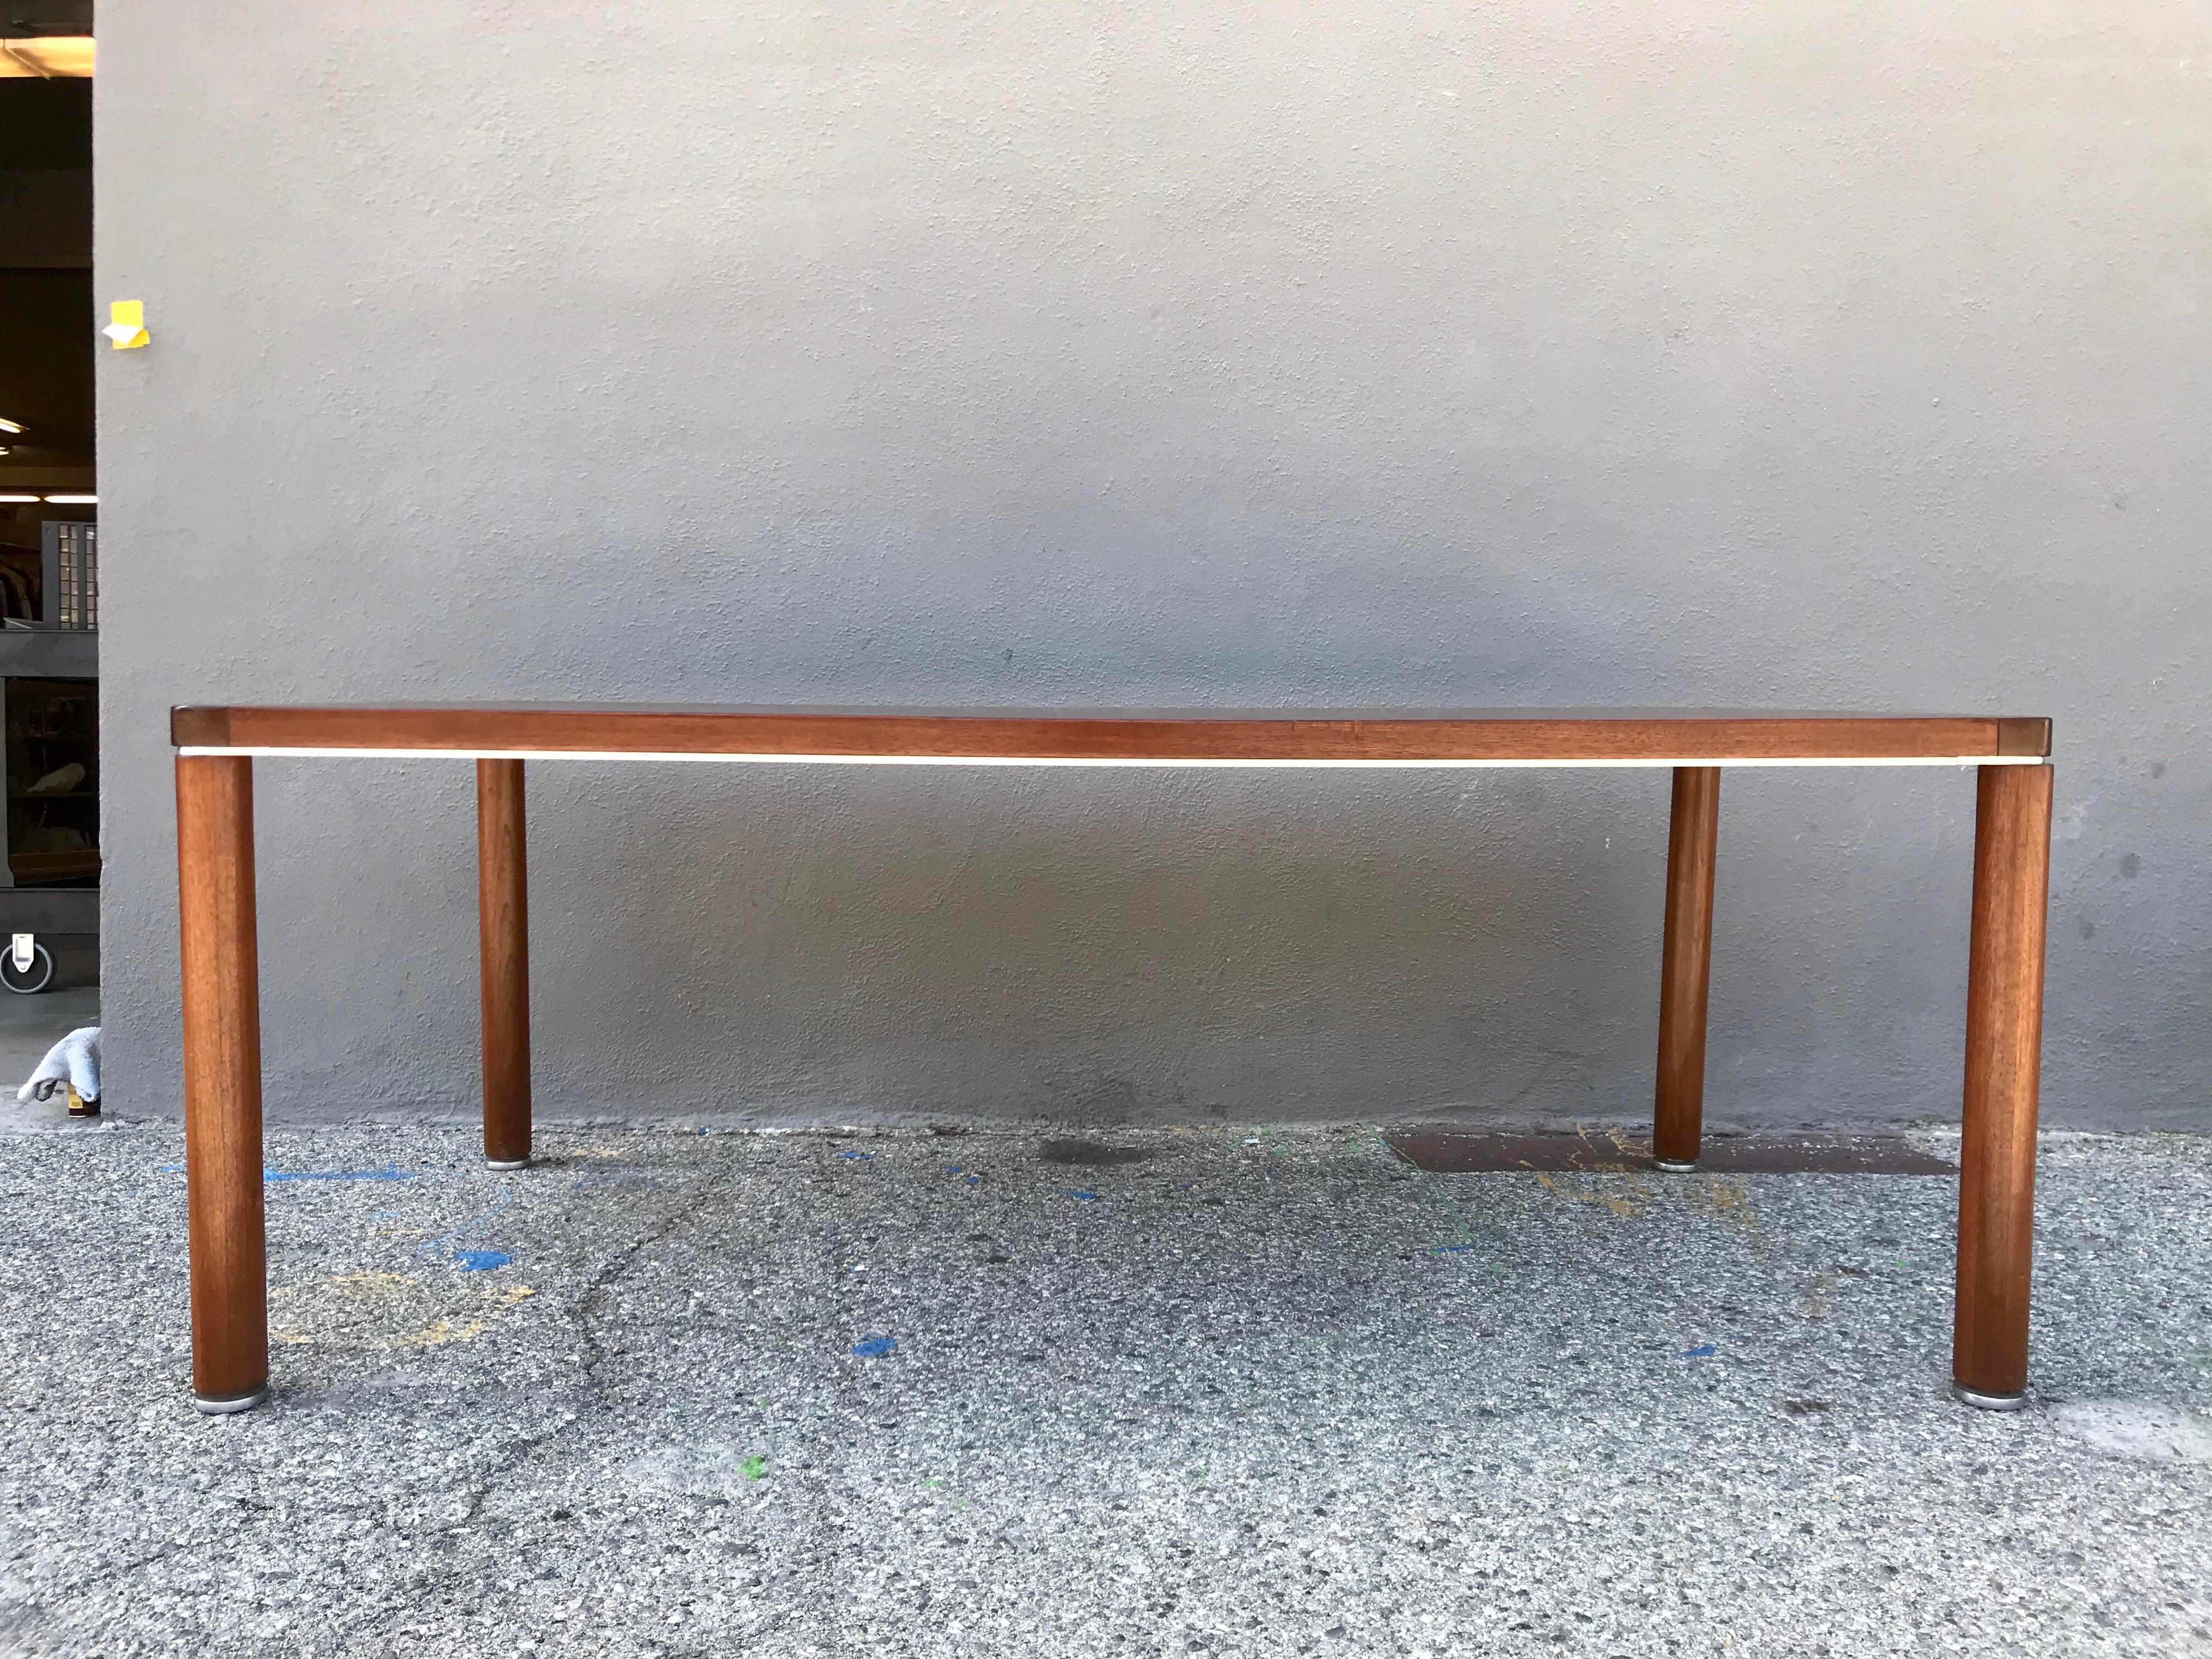 A nice work or dining table
walnut with rounded edges and metal band detailing
original vintage condition, patina, minor scuffs and scratches, no damage.